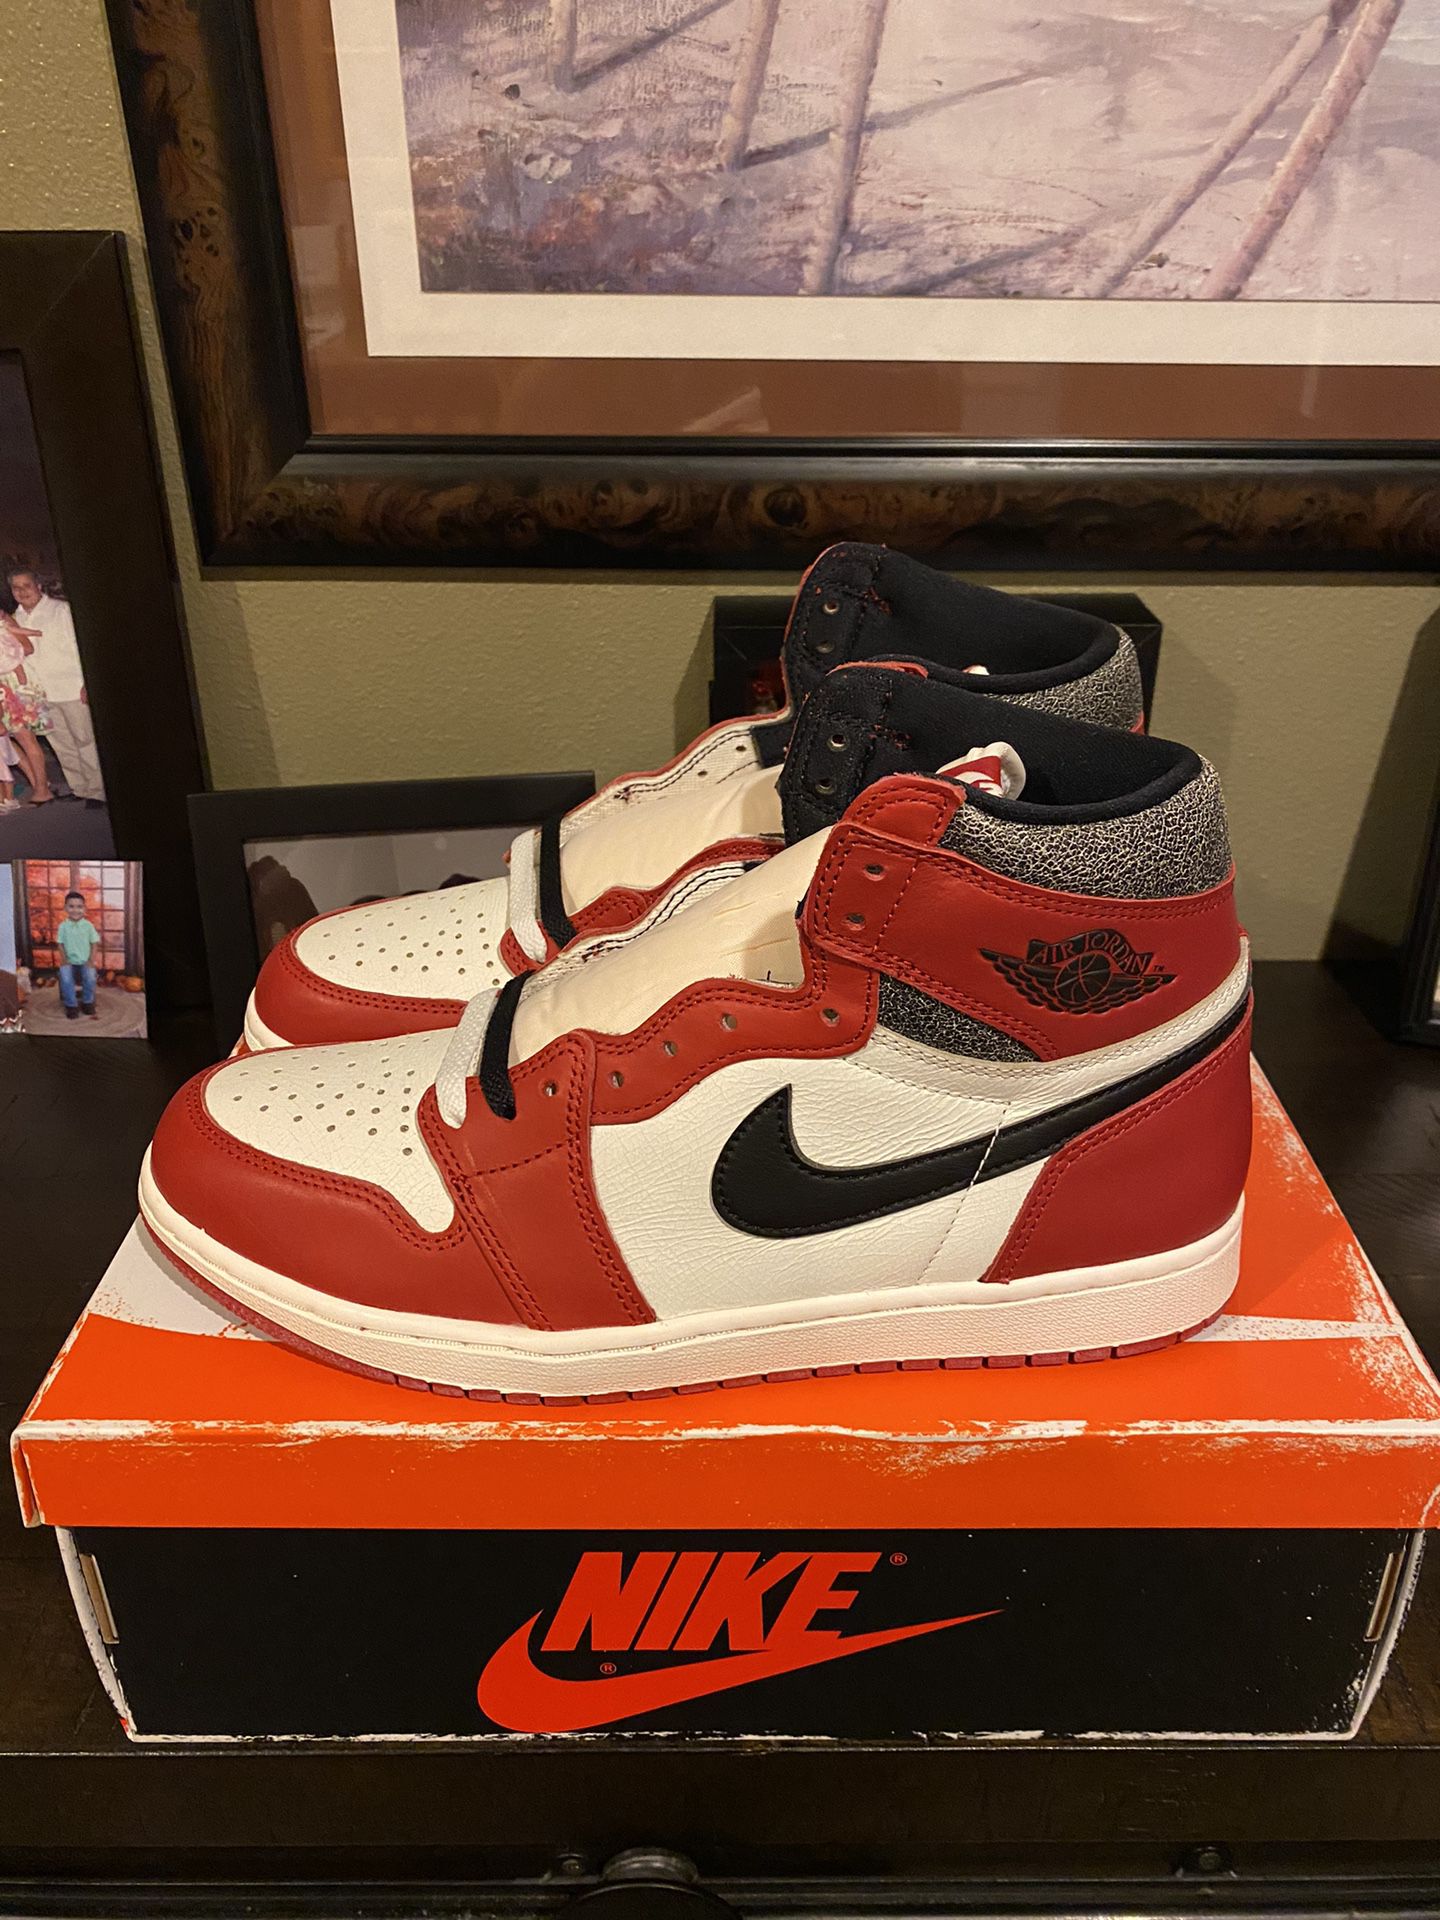 Jordan 1 Lost and Found